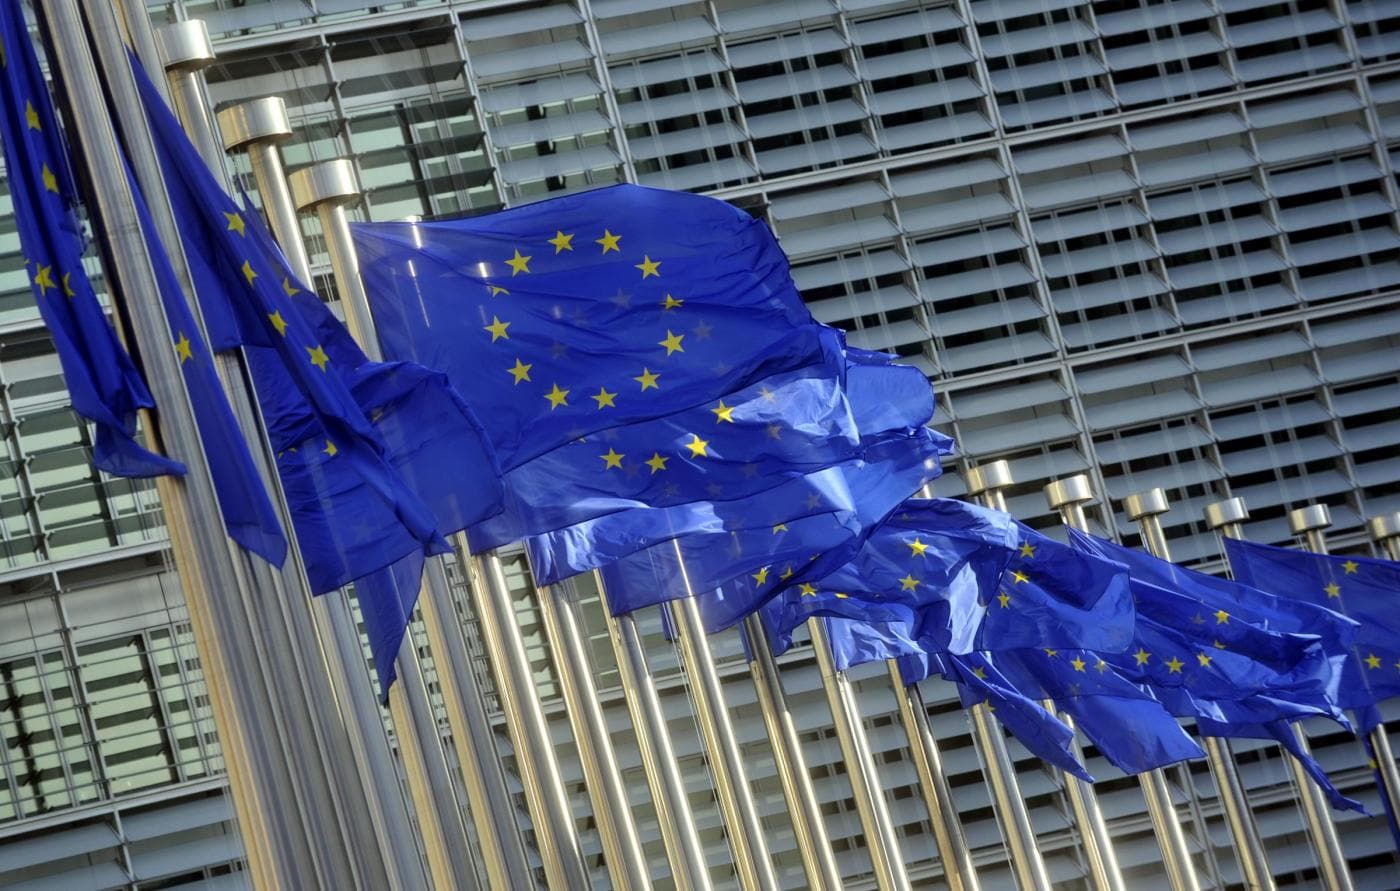 The European Union wants a single app for everything: payment cards, identity cards and more